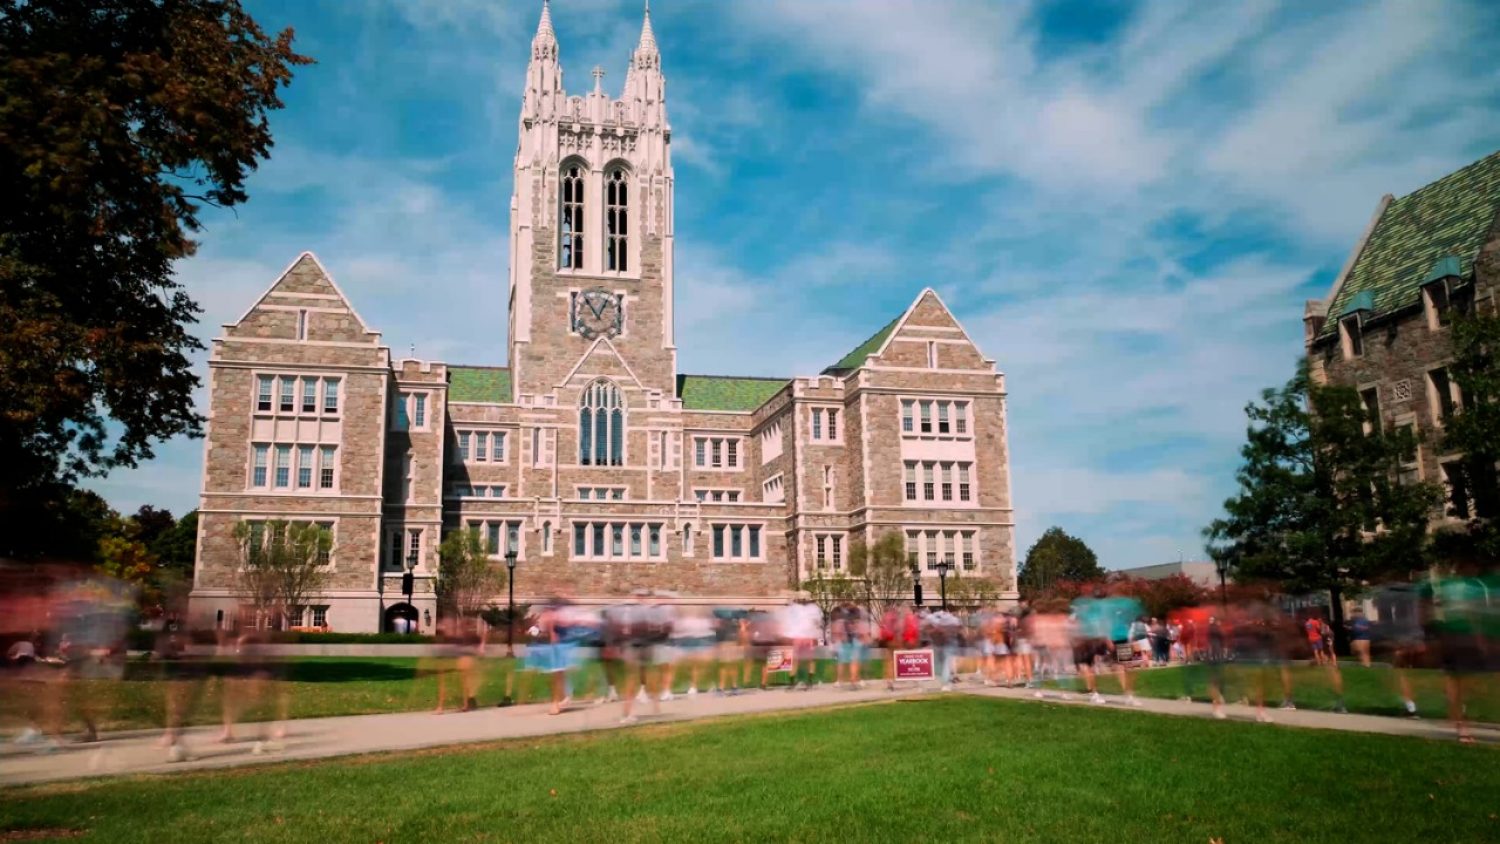 Gasson Hall with students on campus